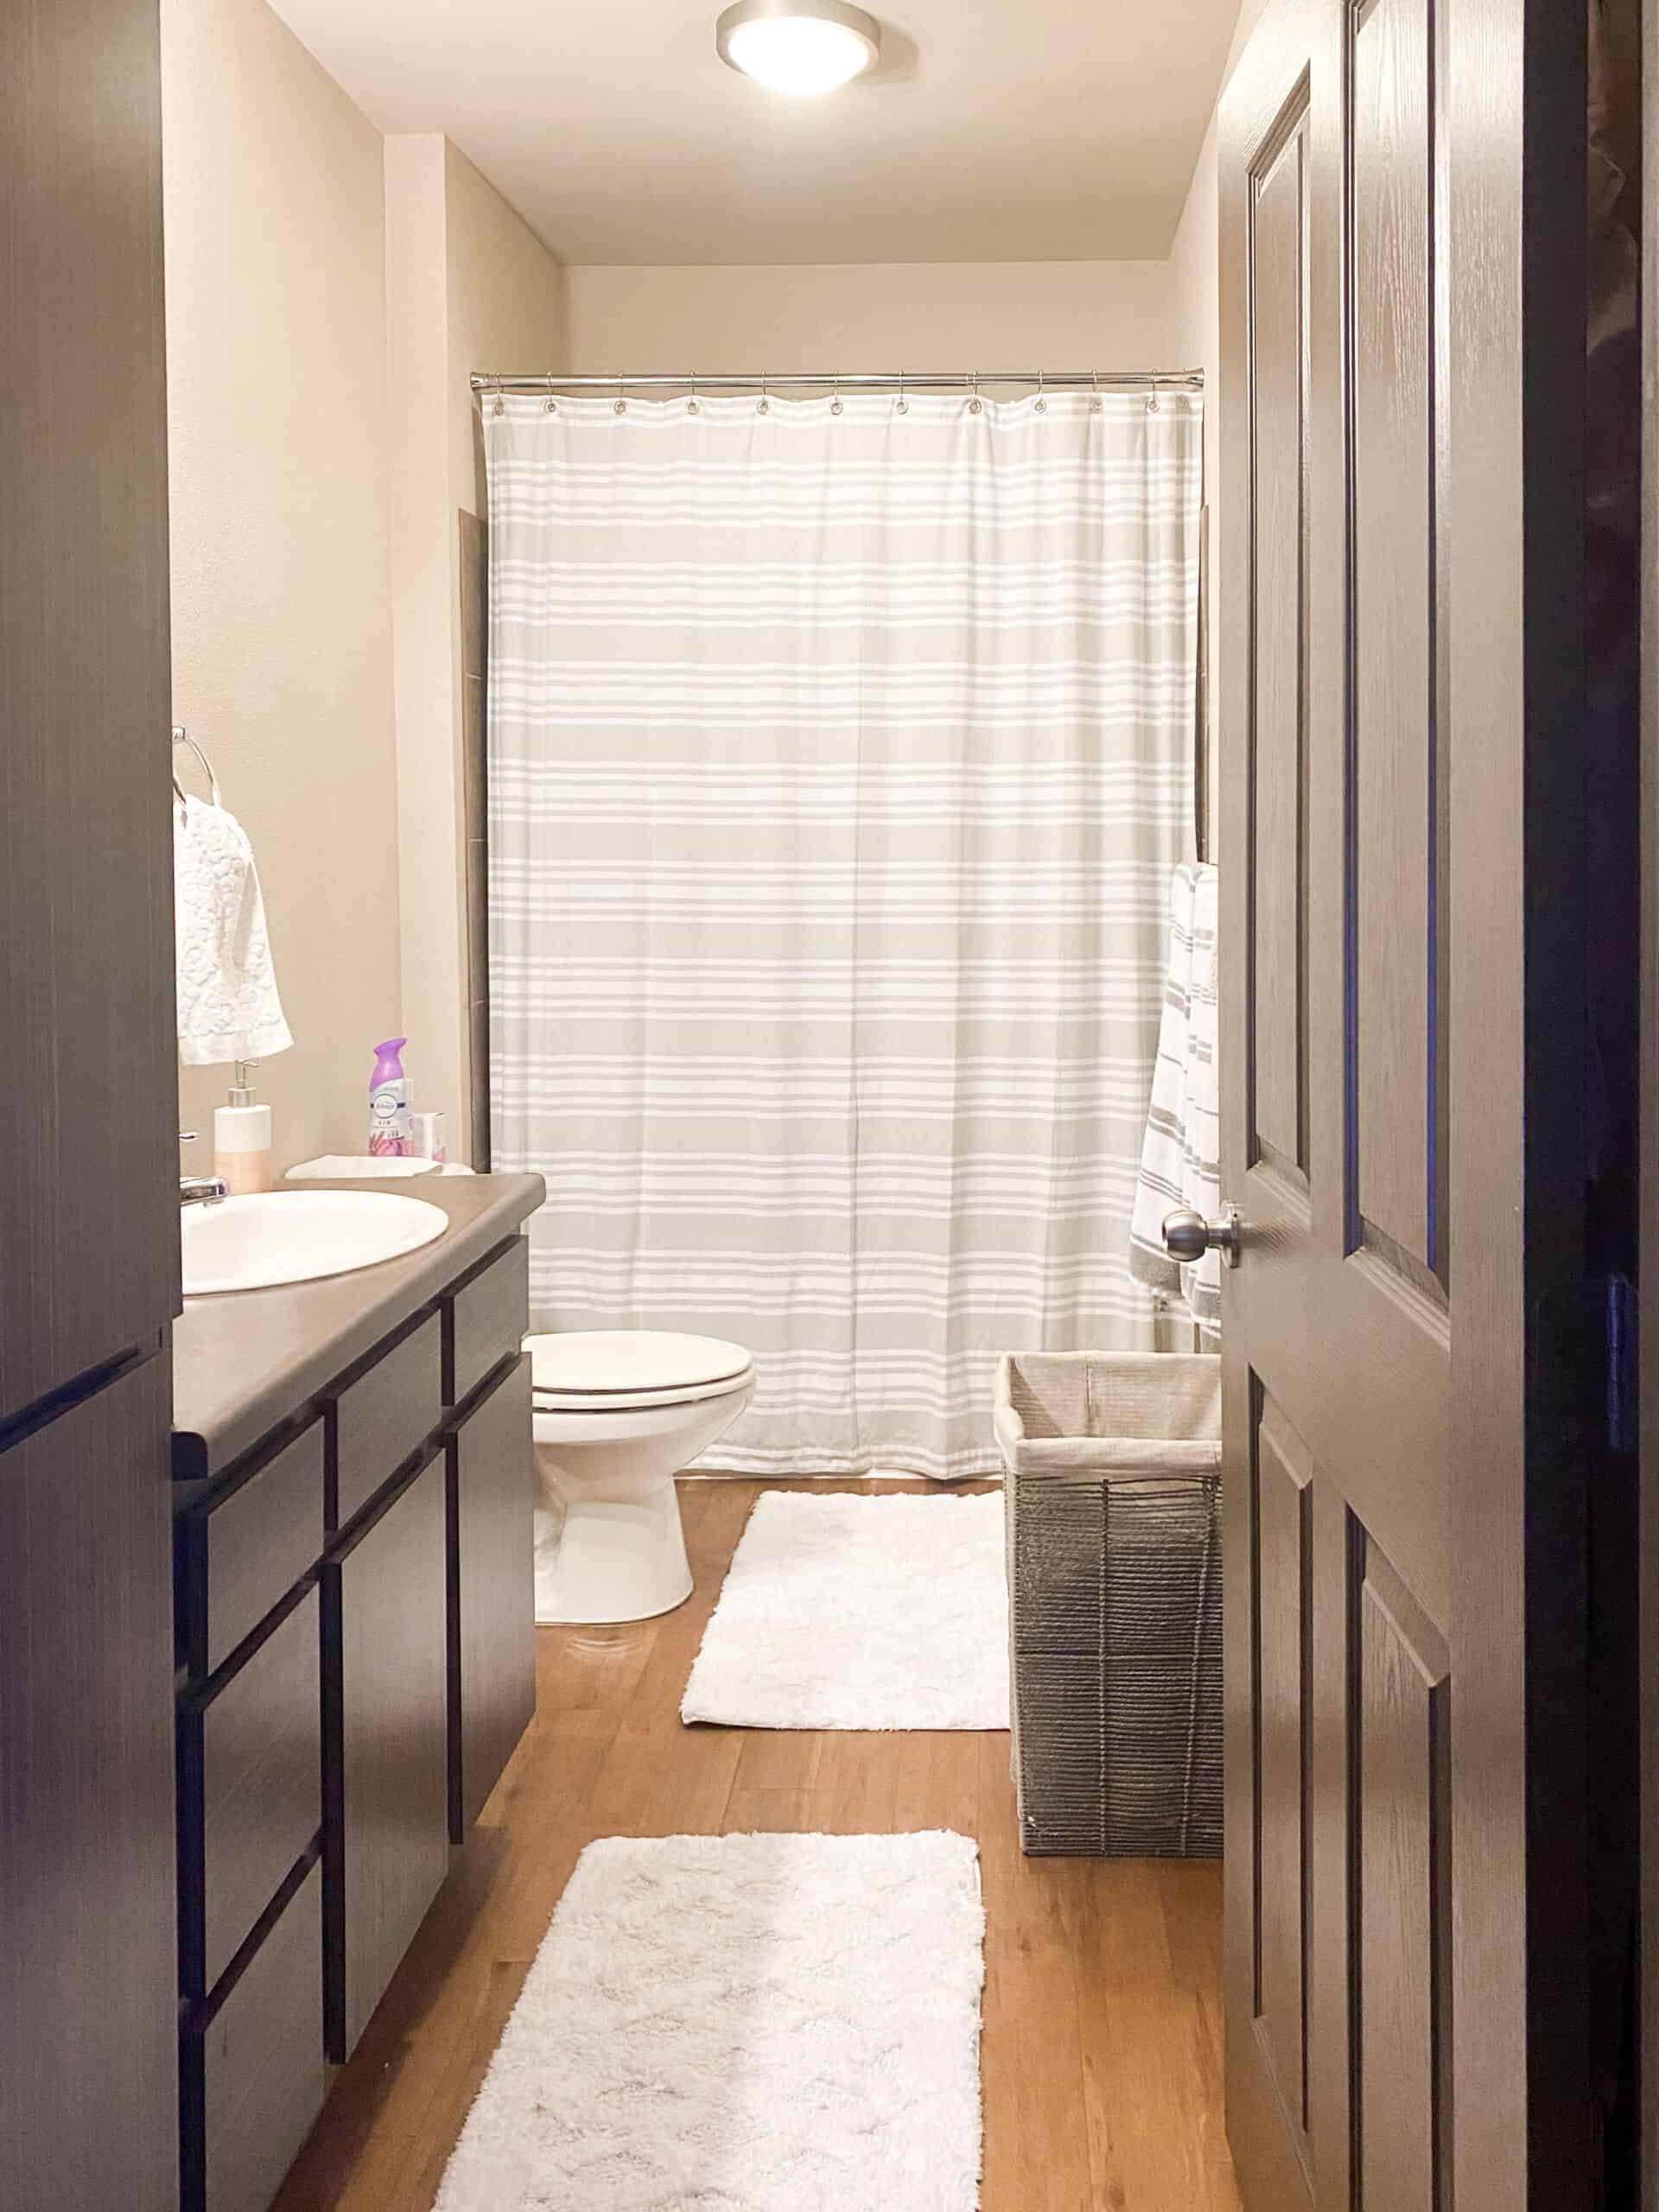 21 College Apartment Bathroom Ideas That Prove You Can Make Bathrooms Look Good By Sophia Lee